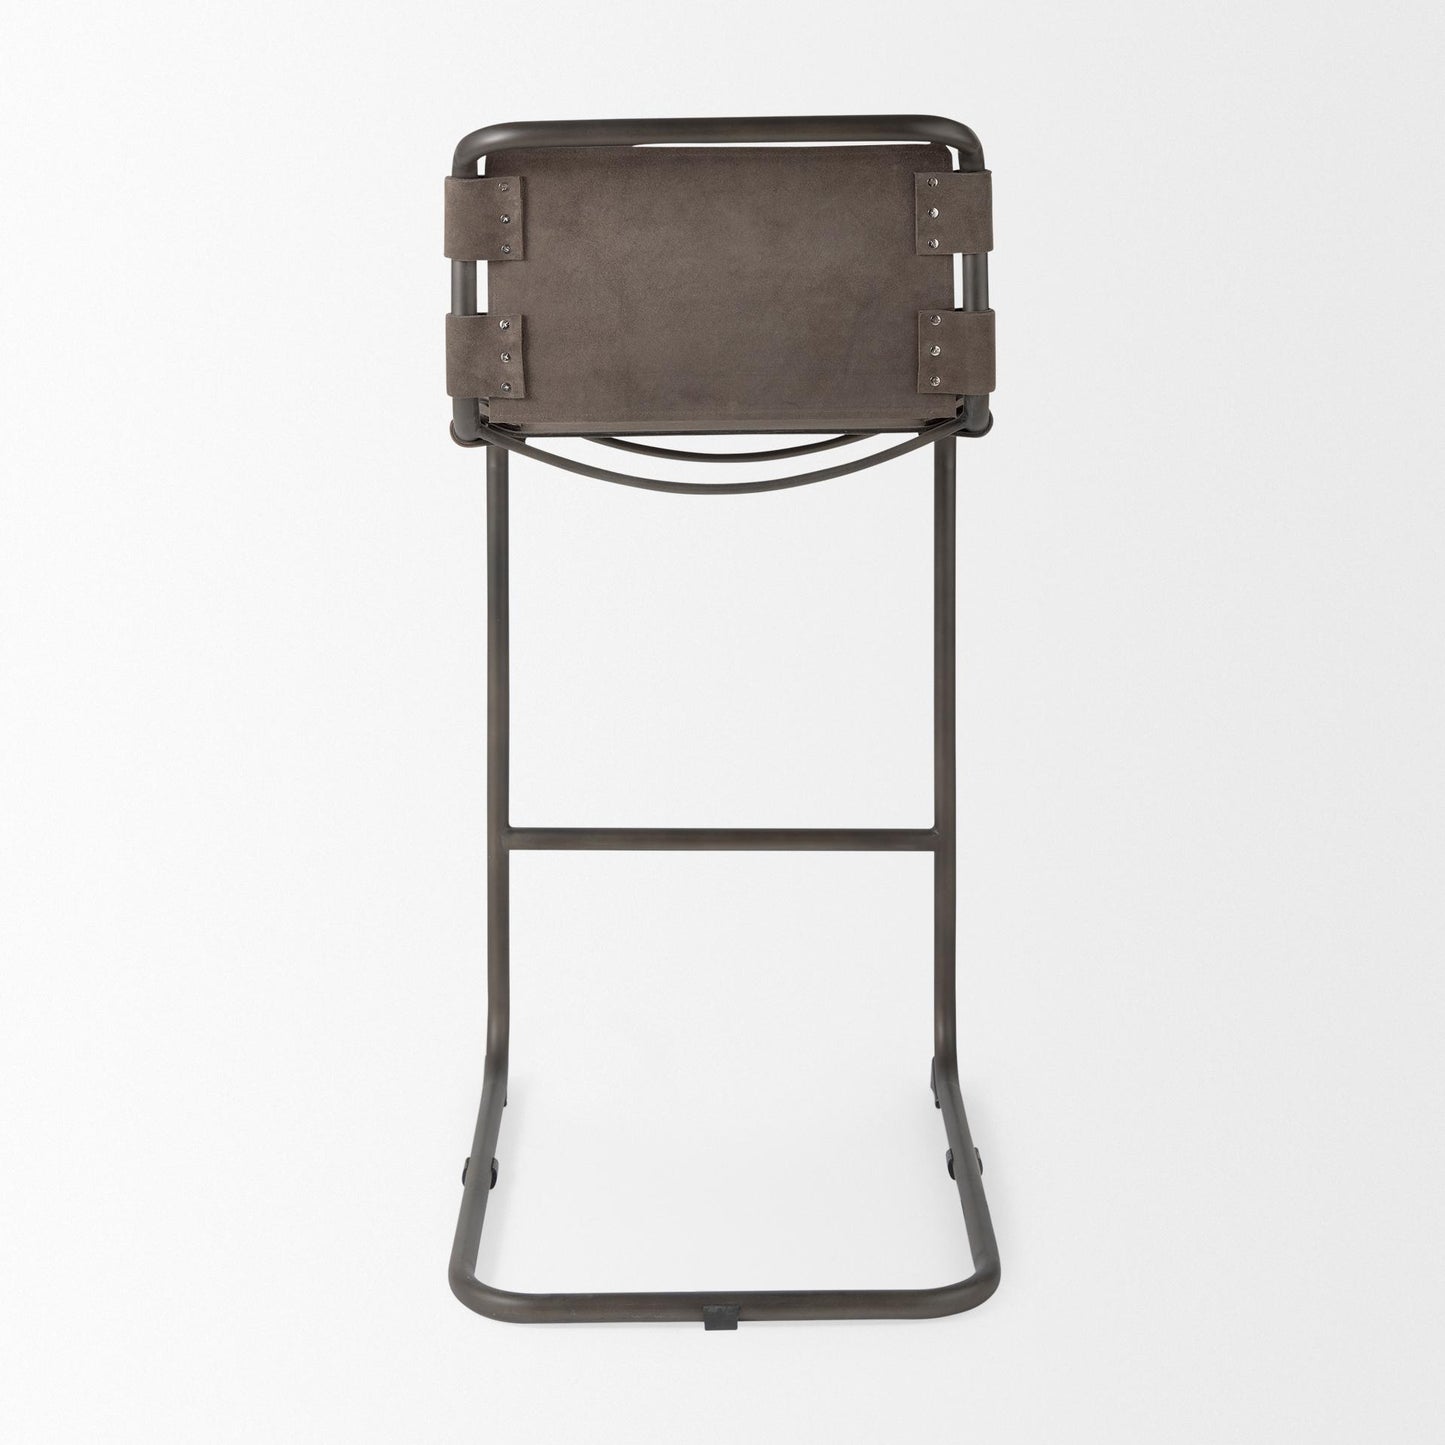 Berbick 43" Total Height Brown/Gray Suede w/ Iron Frame Bar Stool